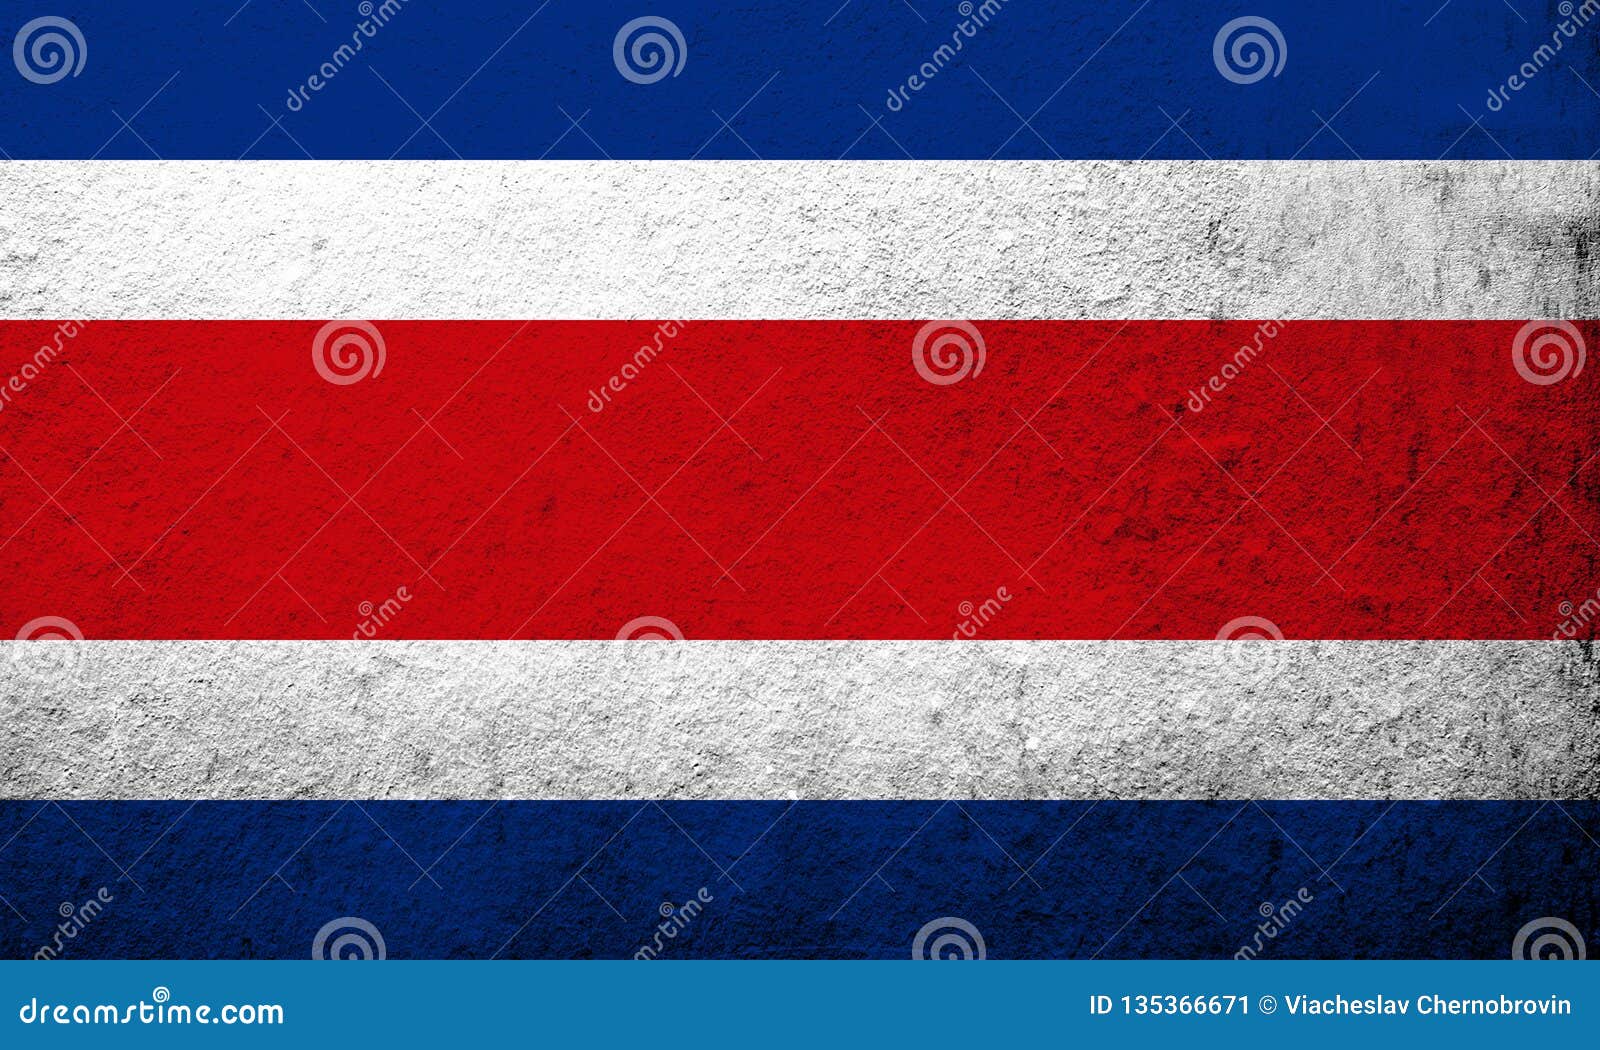 The Republic of Costa Rica National Flag. Grunge Background Stock ...